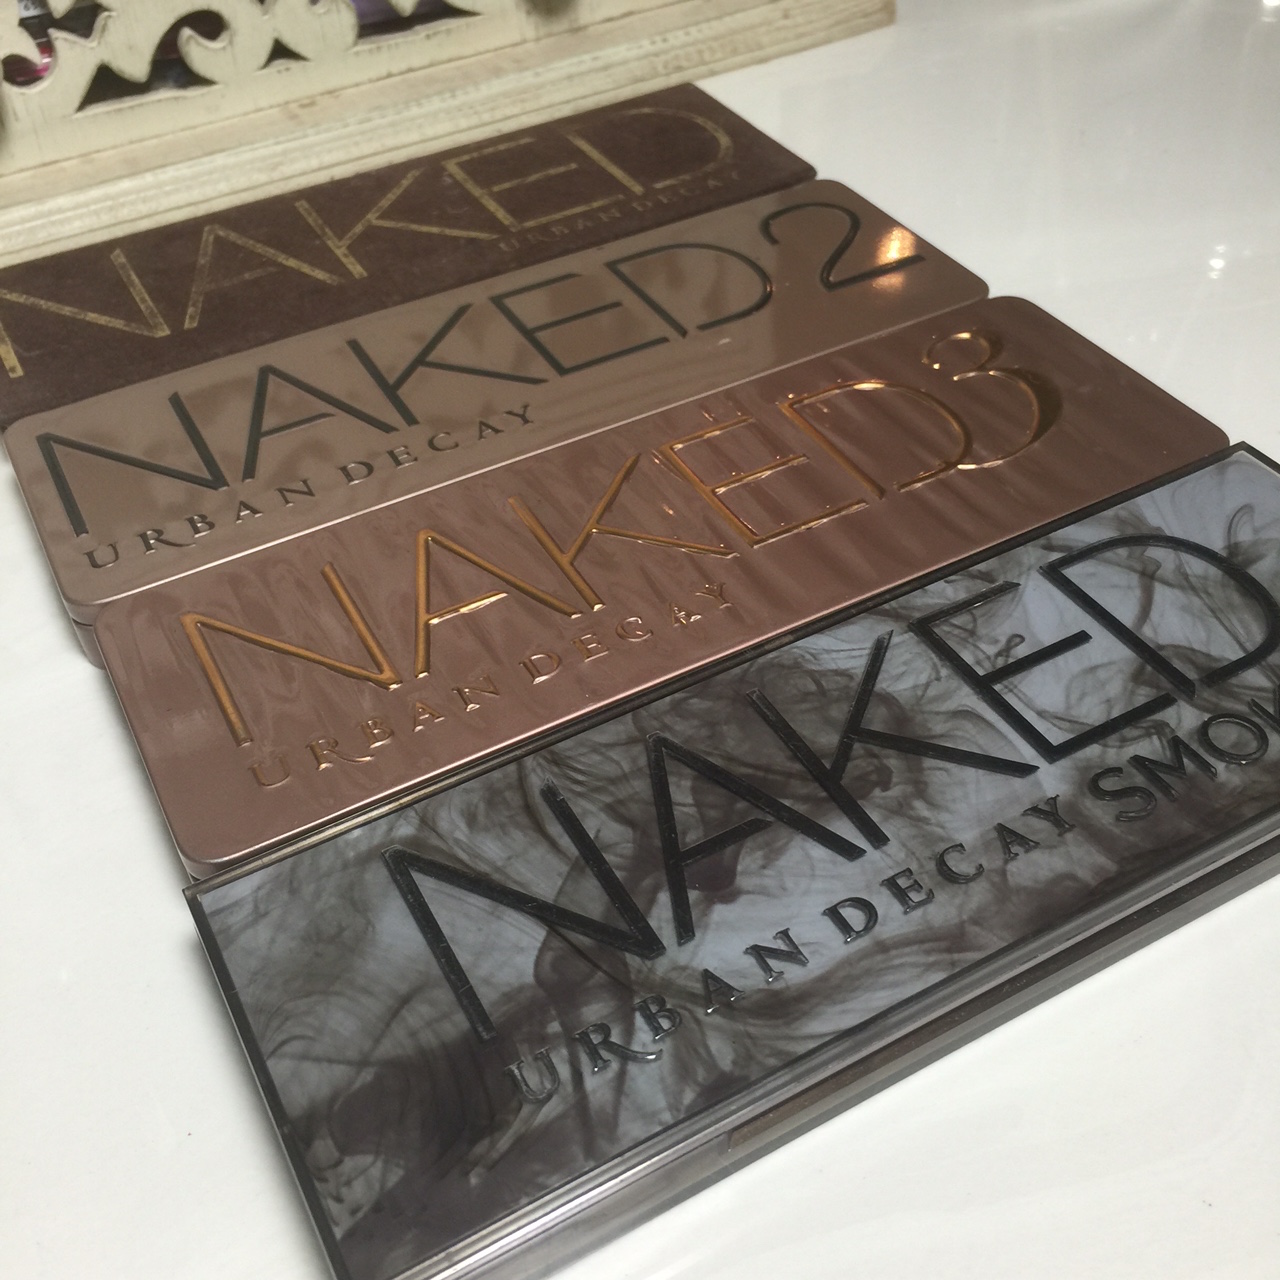 Comparing The Urban Decay Naked Palettes